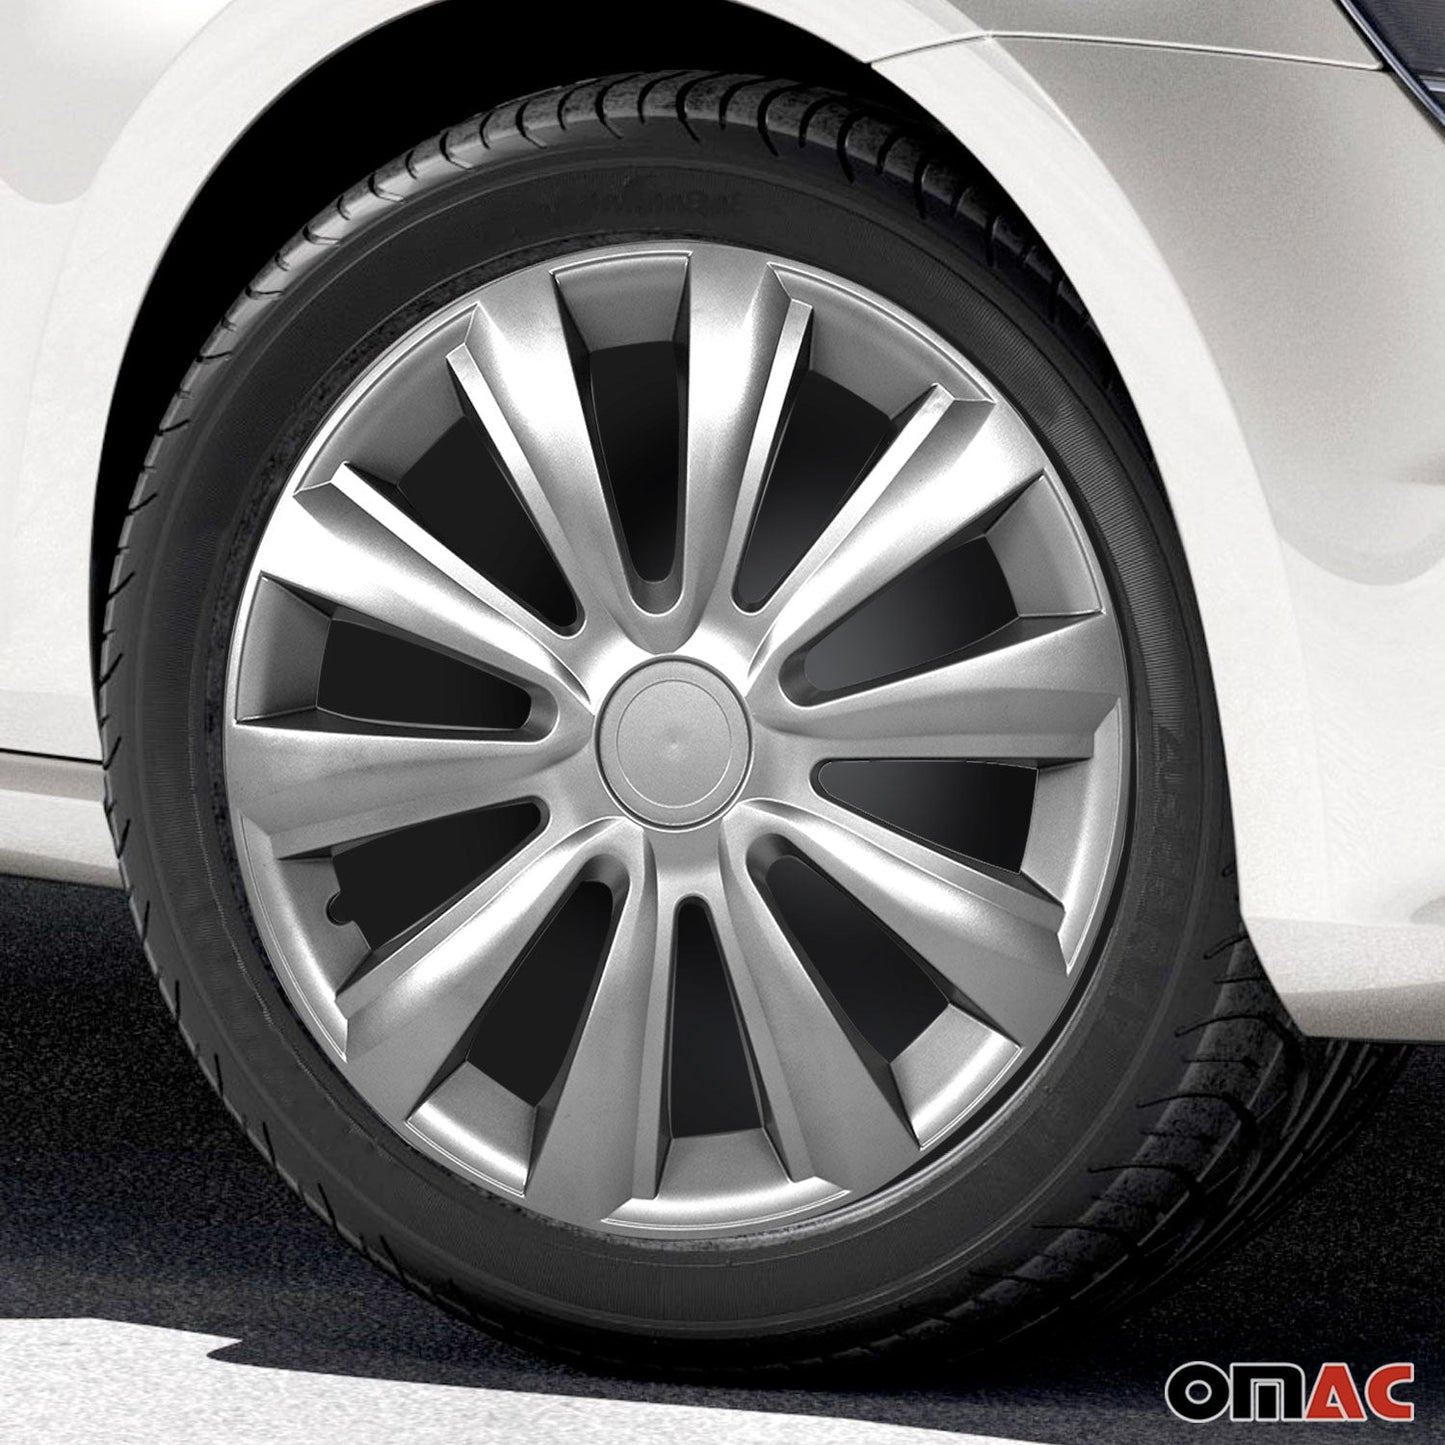 OMAC 16 Inch Wheel Covers Hubcaps for Mazda Silver Gray Gloss G002345